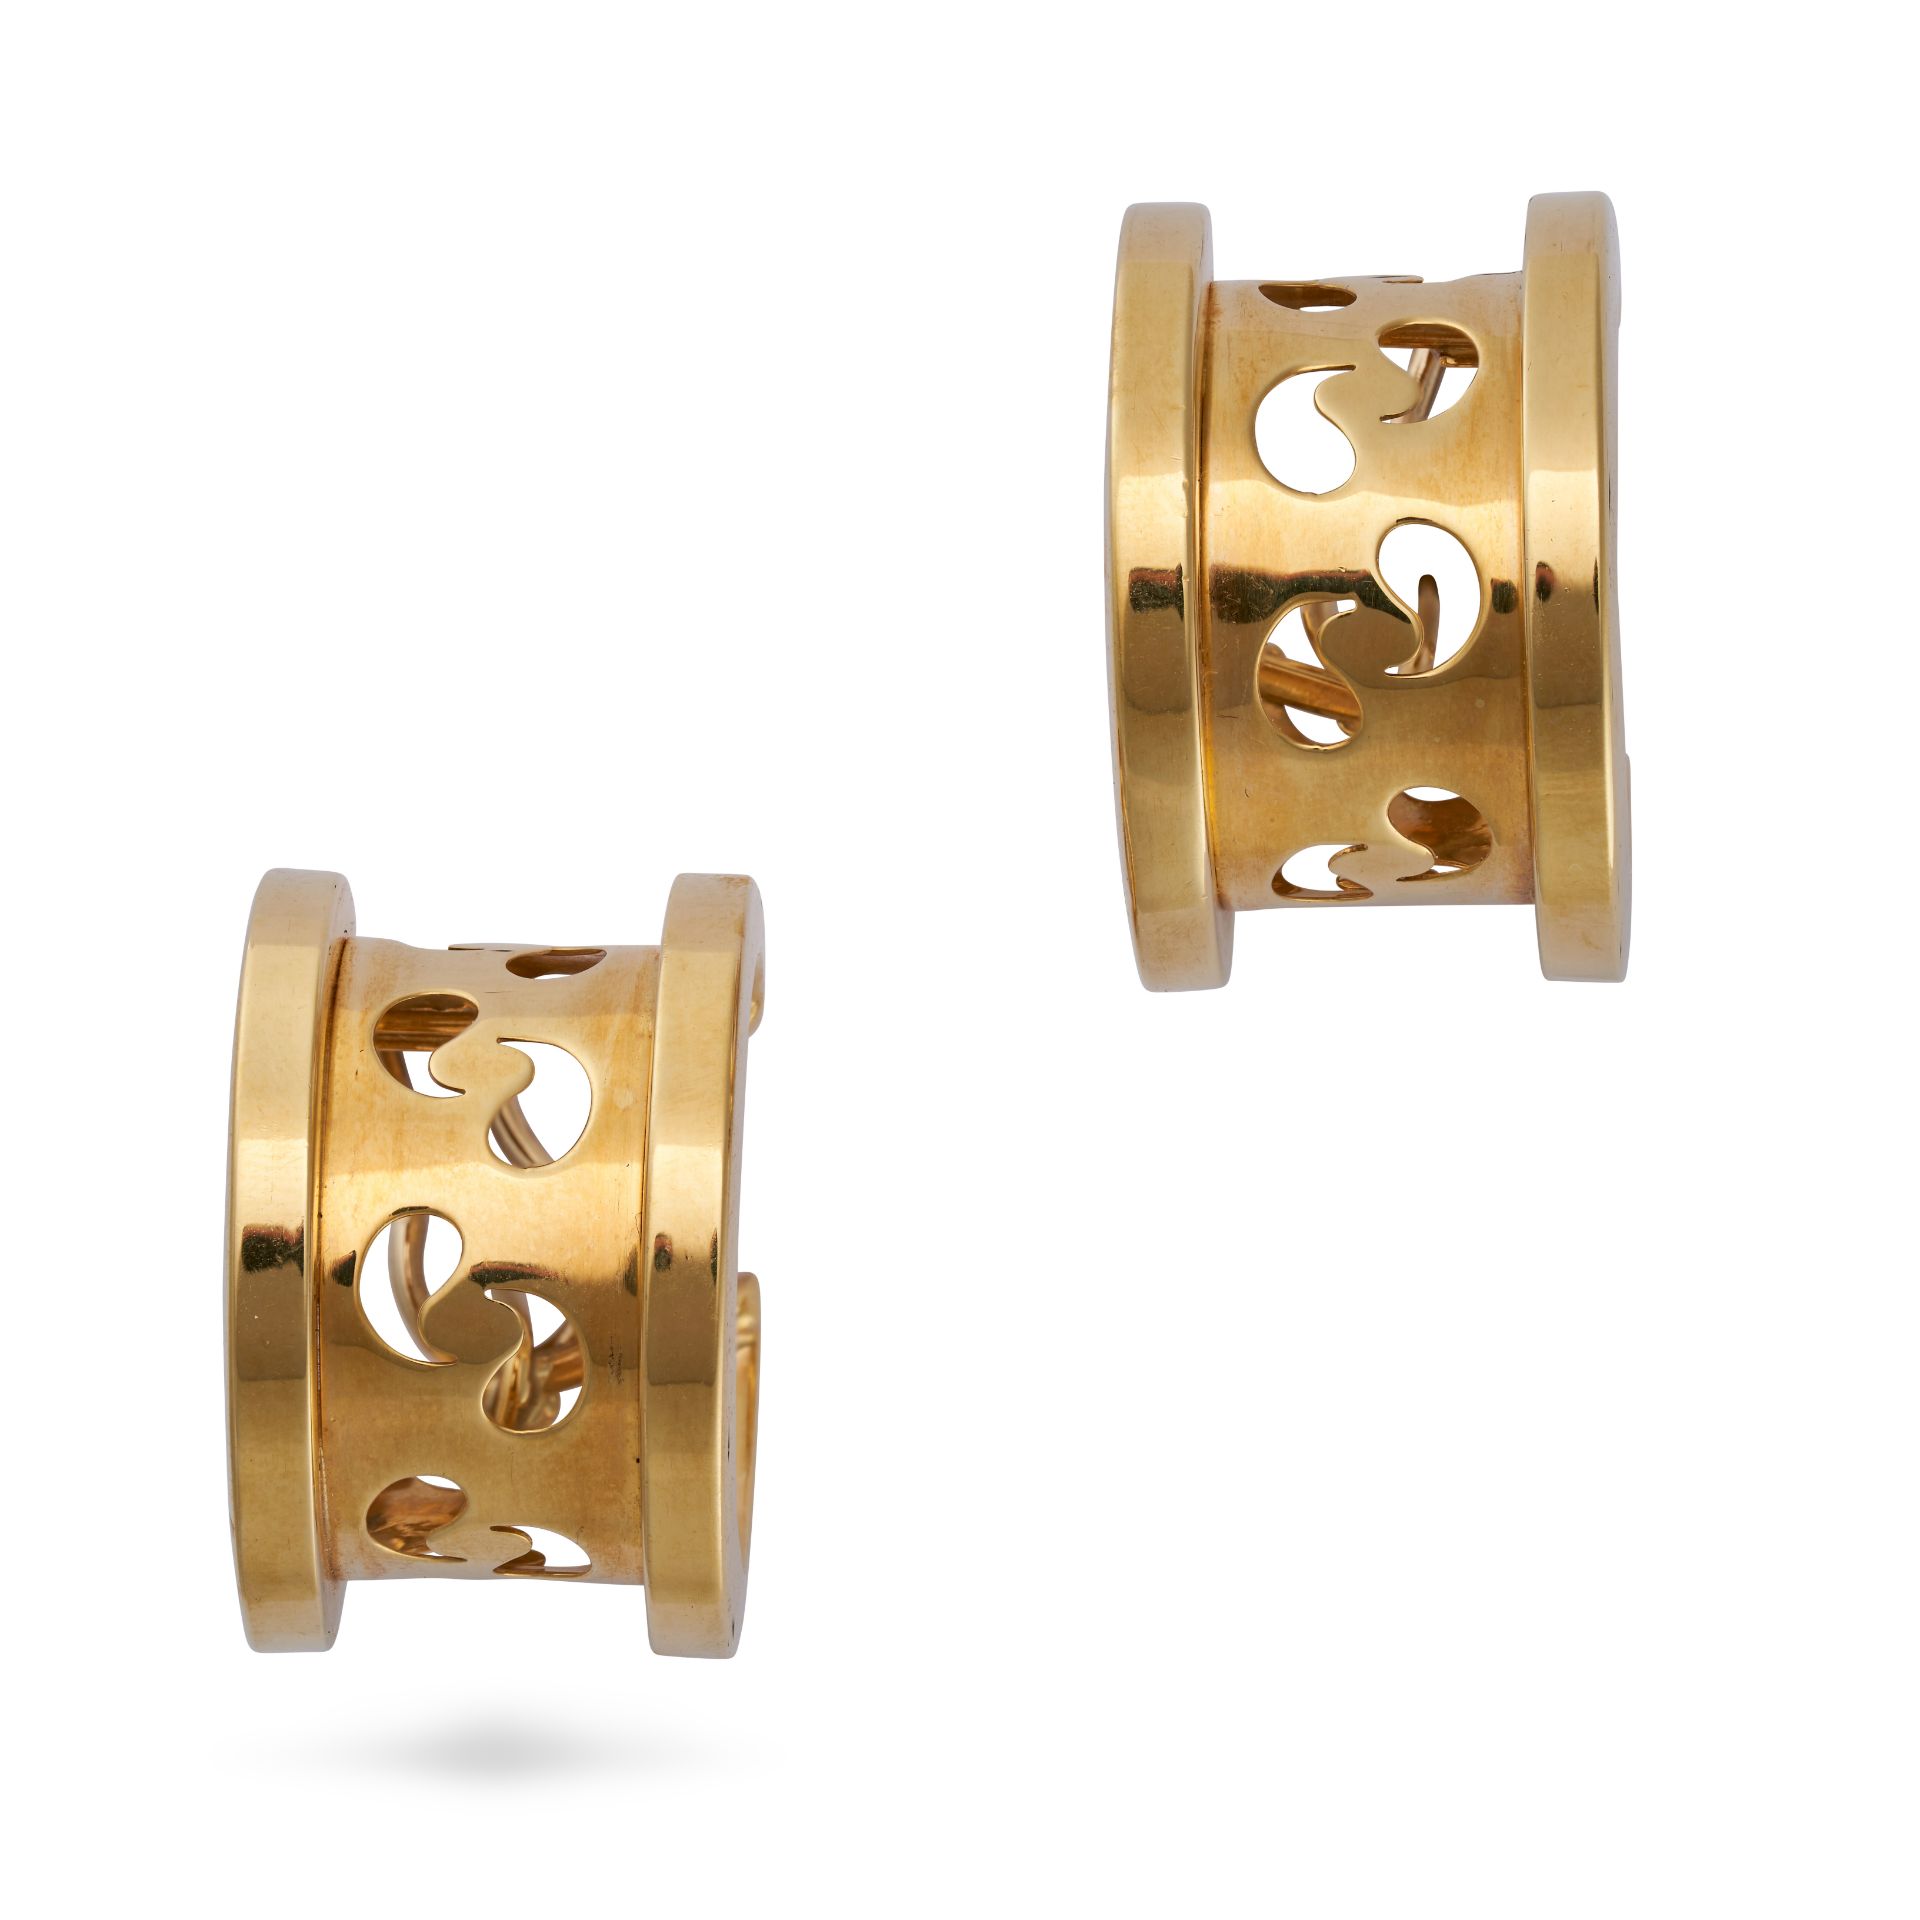 A PAIR OF GOLD HOOP EARRINGS in 18ct yellow gold, each hoop with a central cut out design, stampe...